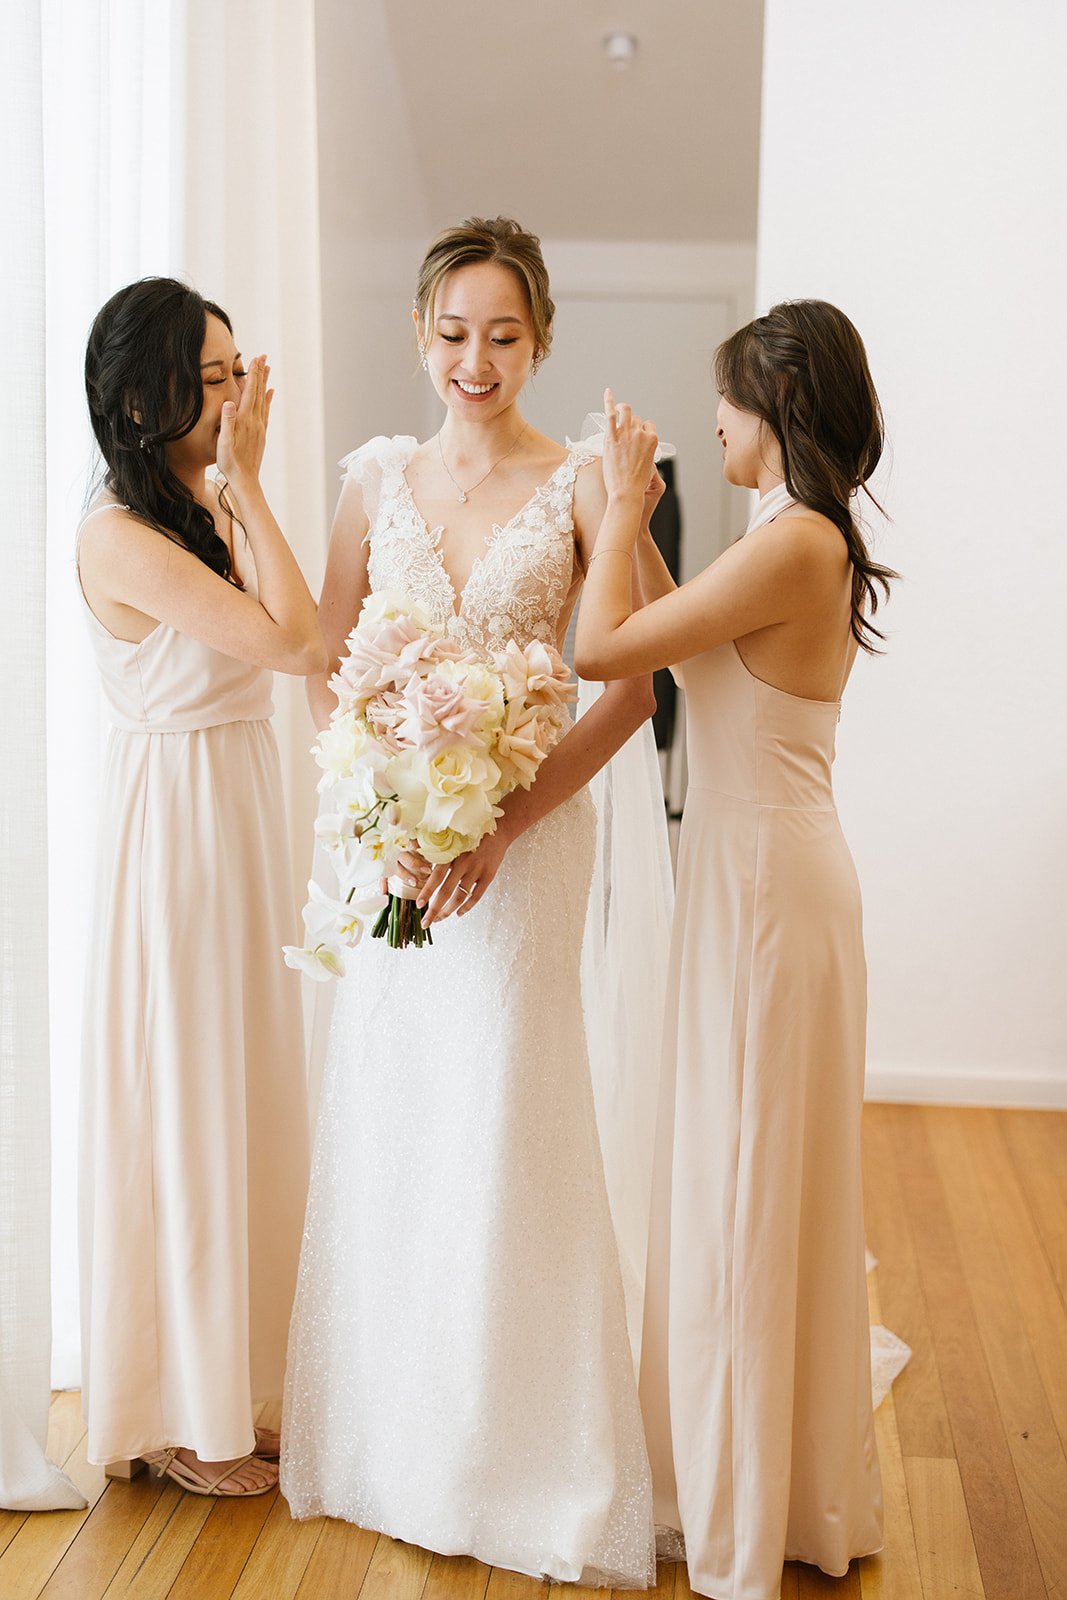  bridesmaids photographed getting the bride ready for her wedding 